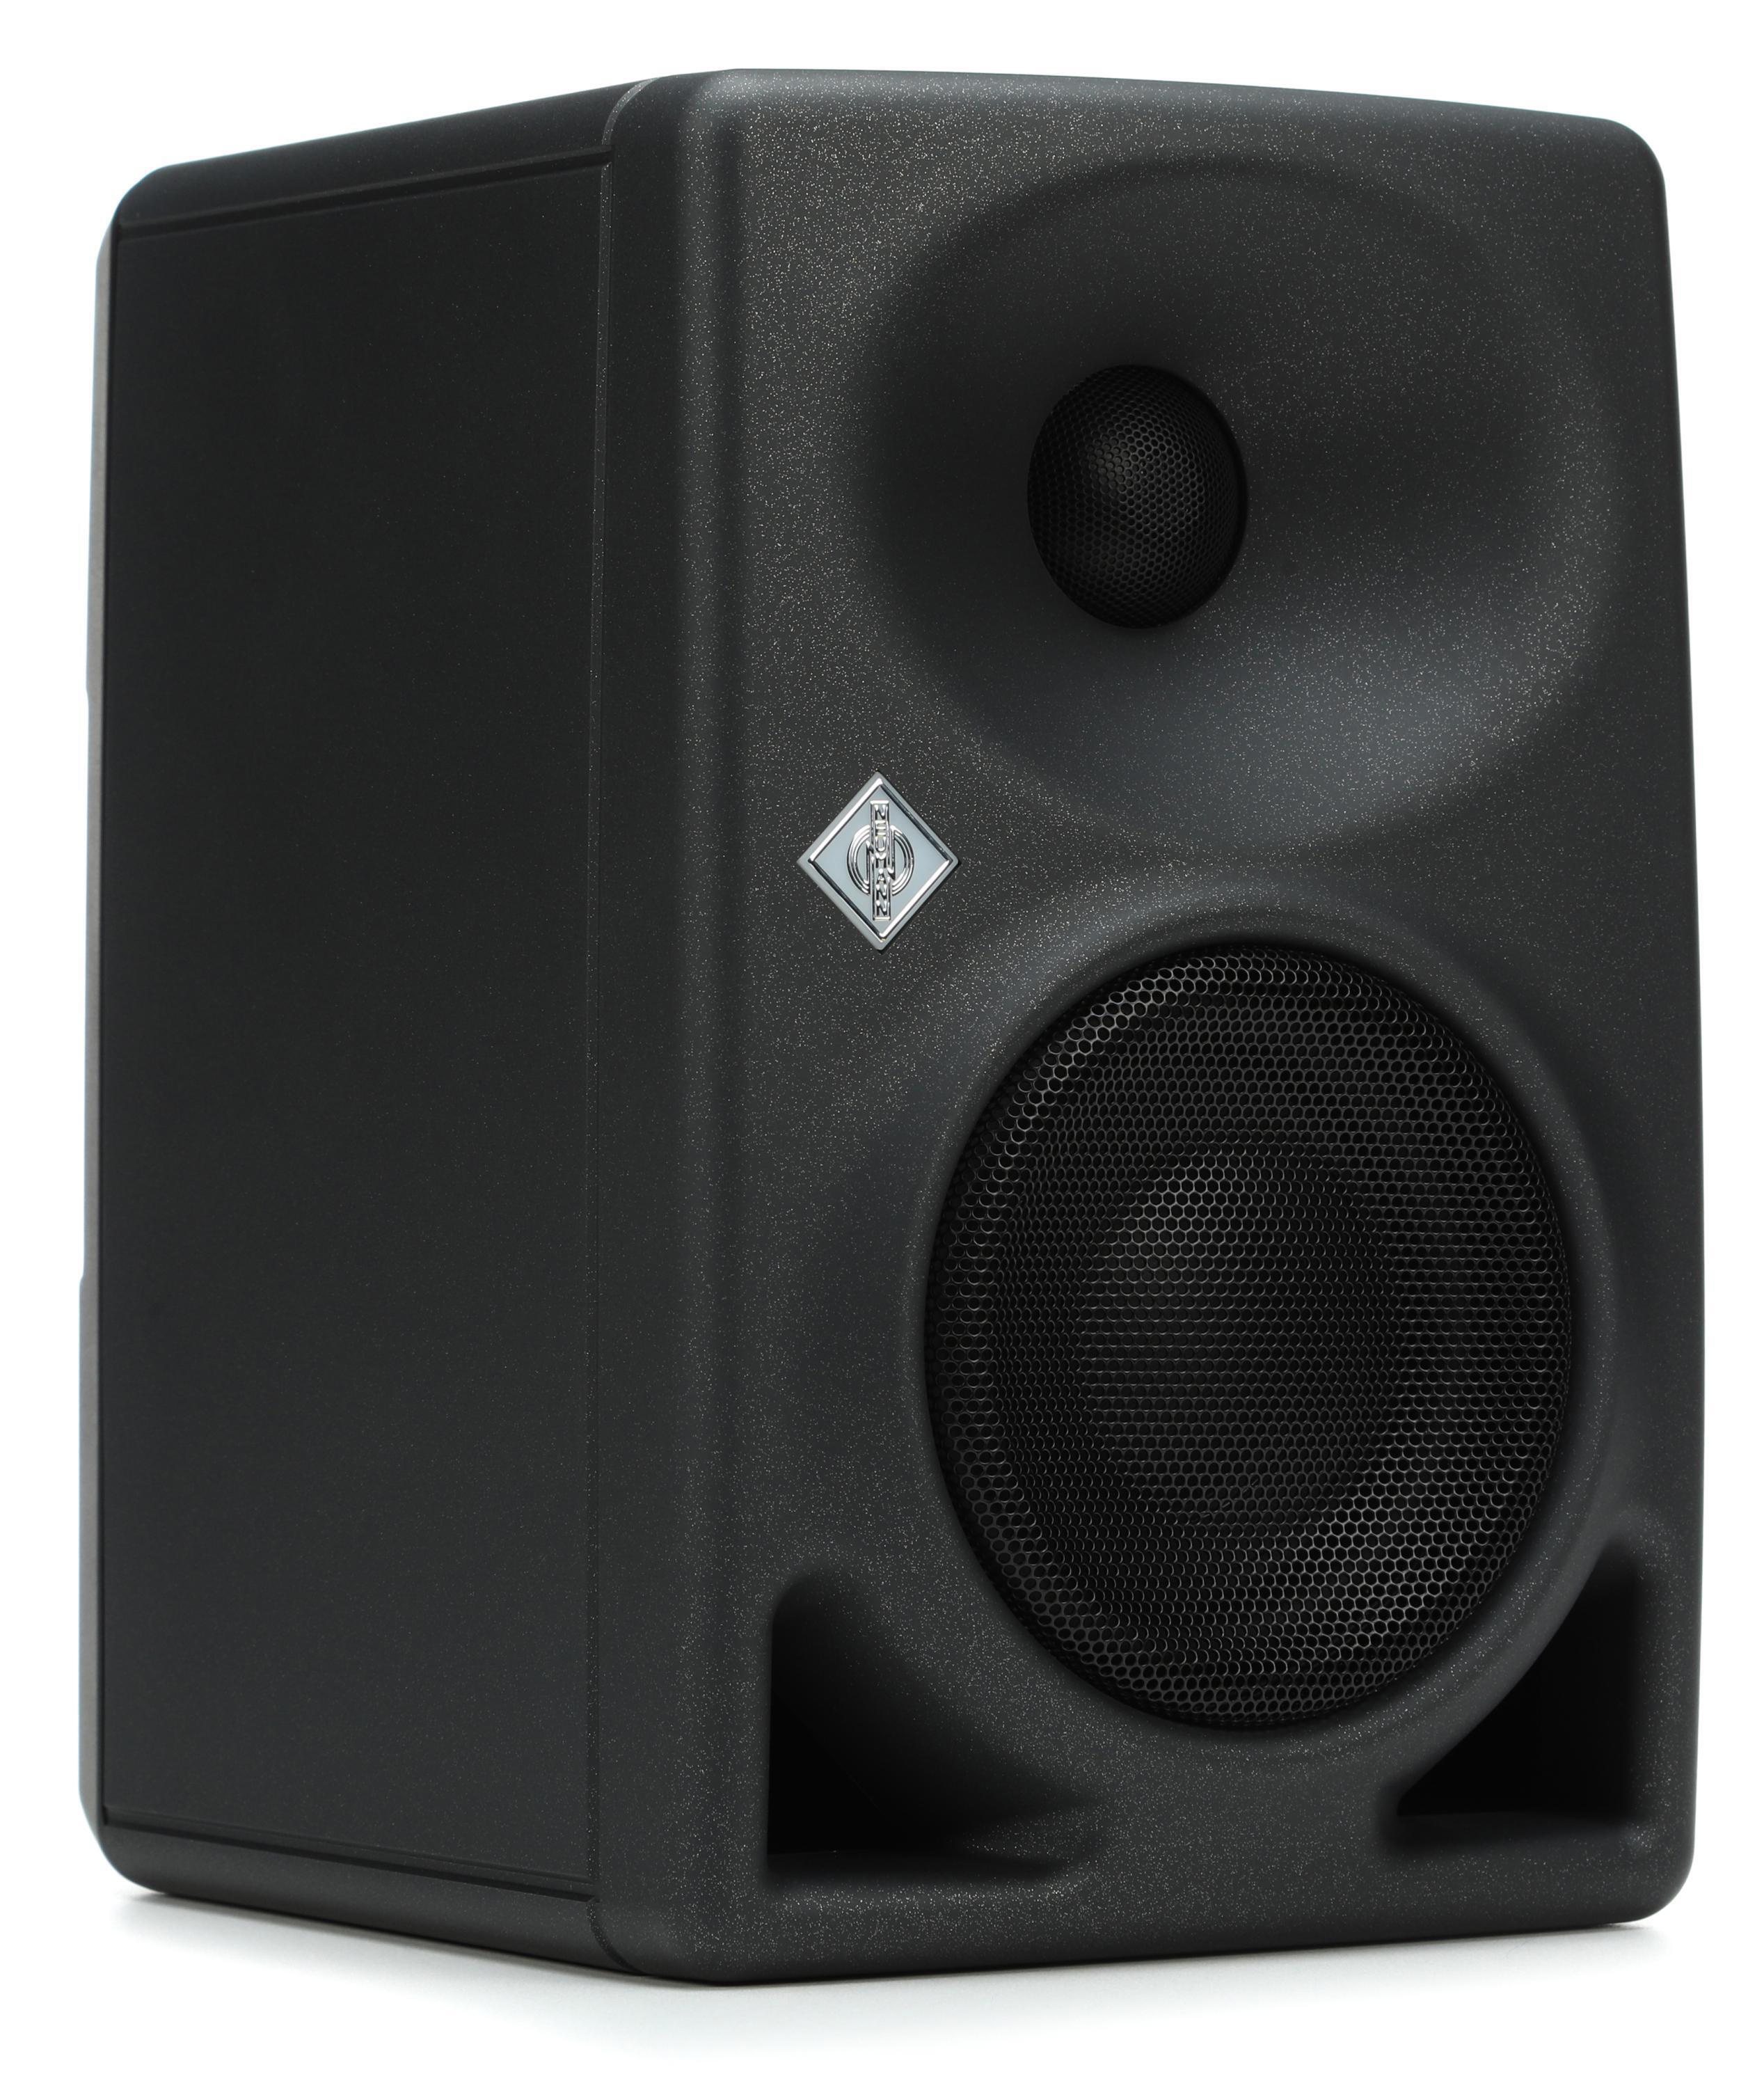 Neumann KH 80 DSP 4 inch Powered Studio Monitor | Sweetwater